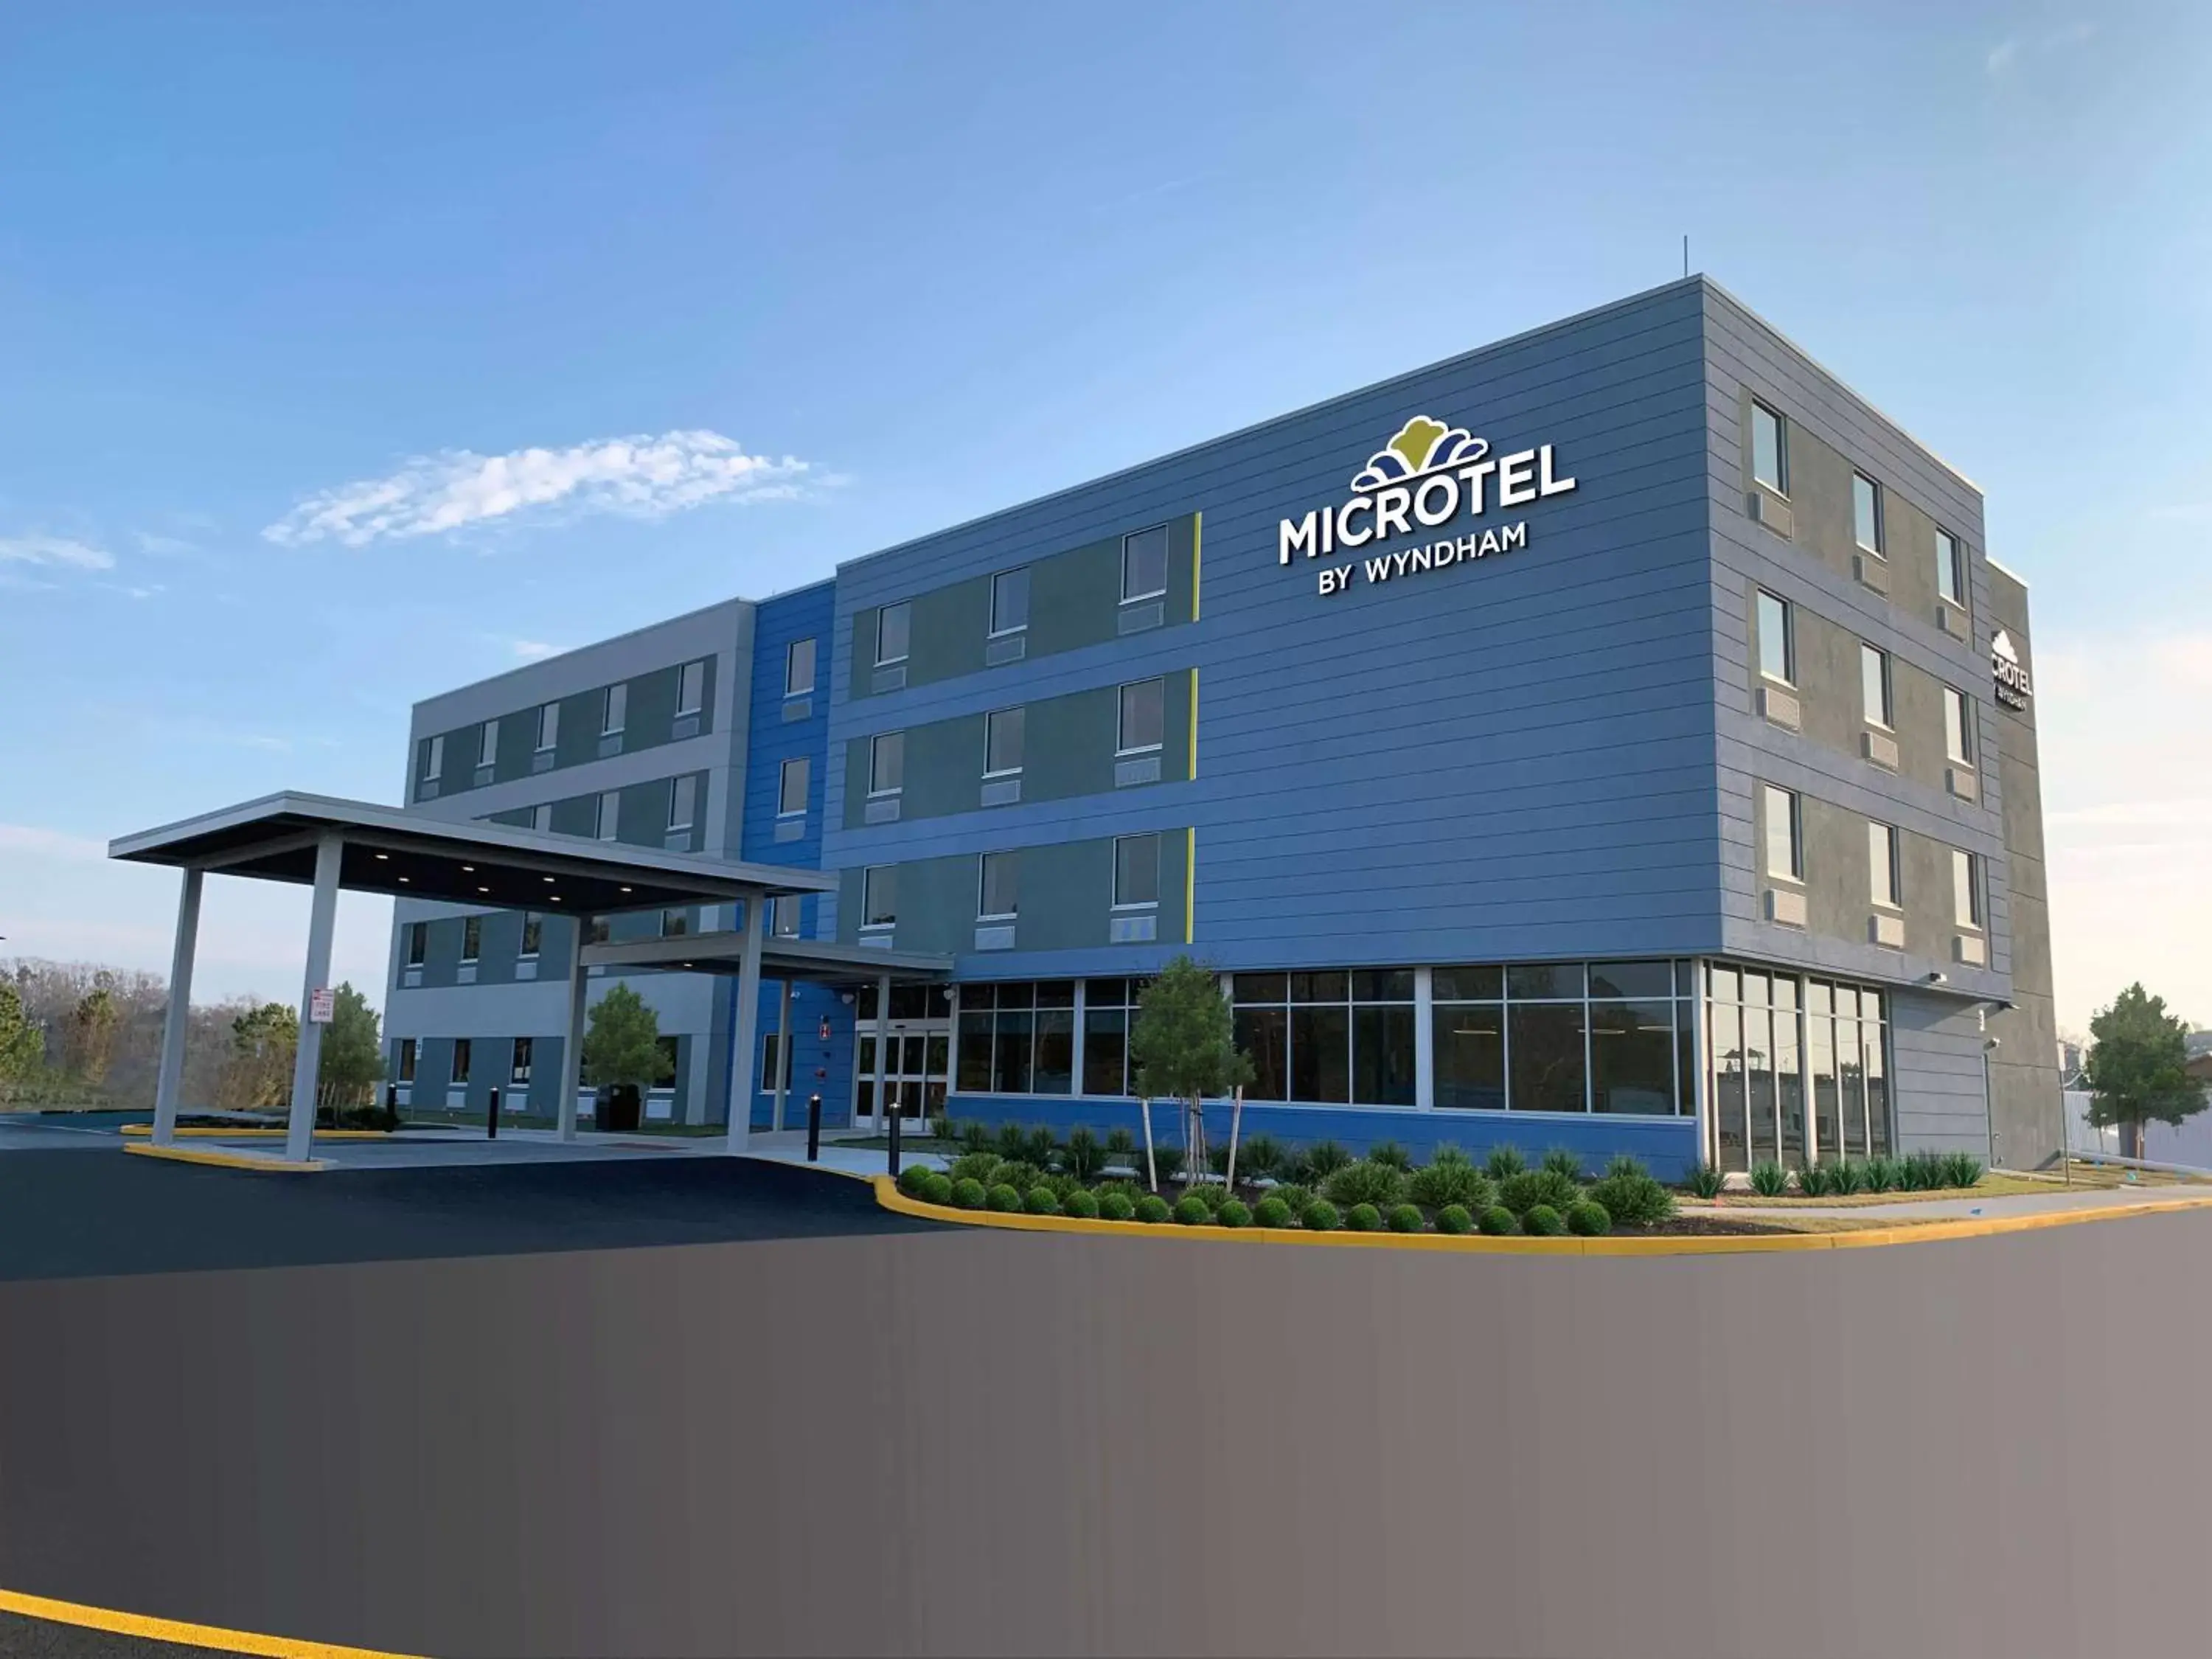 Property Building in Microtel Inn & Suites by Wyndham Rehoboth Beach